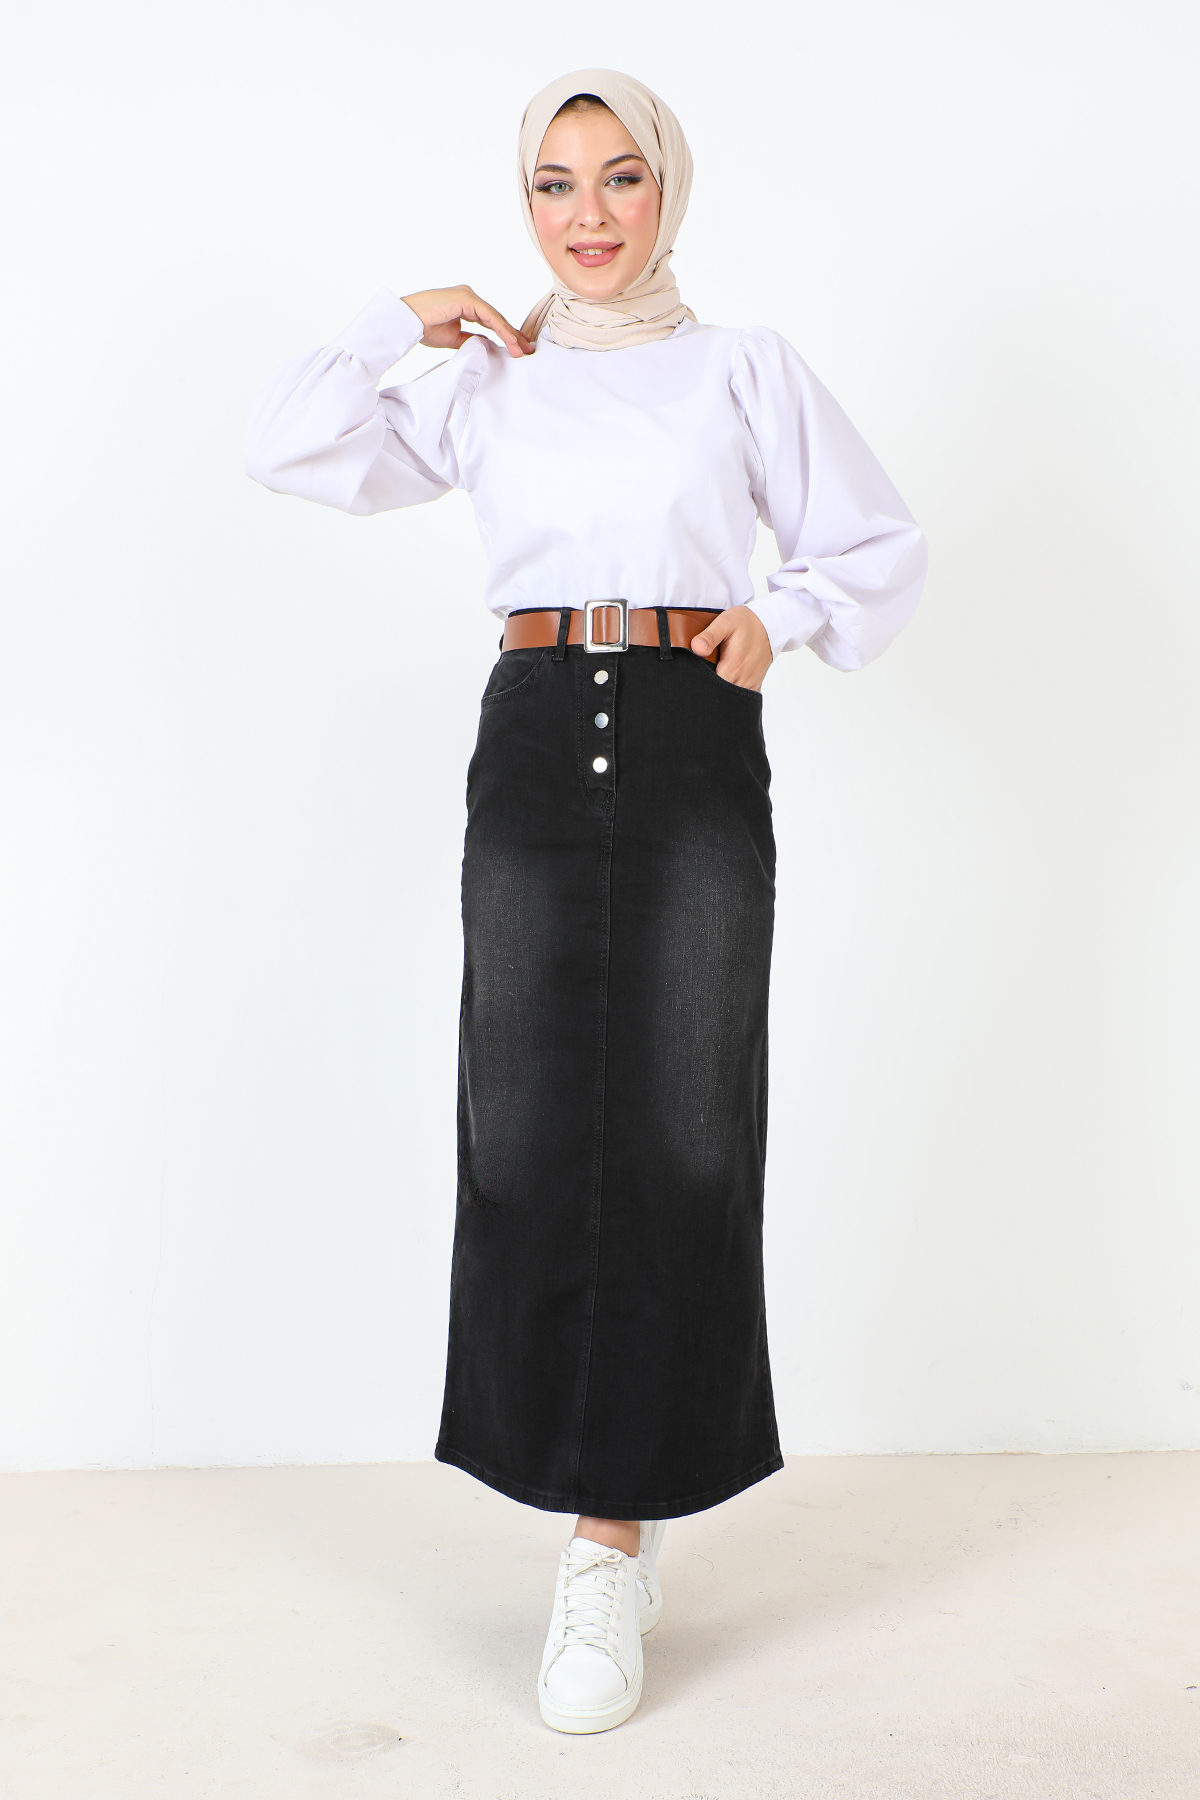 Arched Jeans Skirt TSD231015 Black